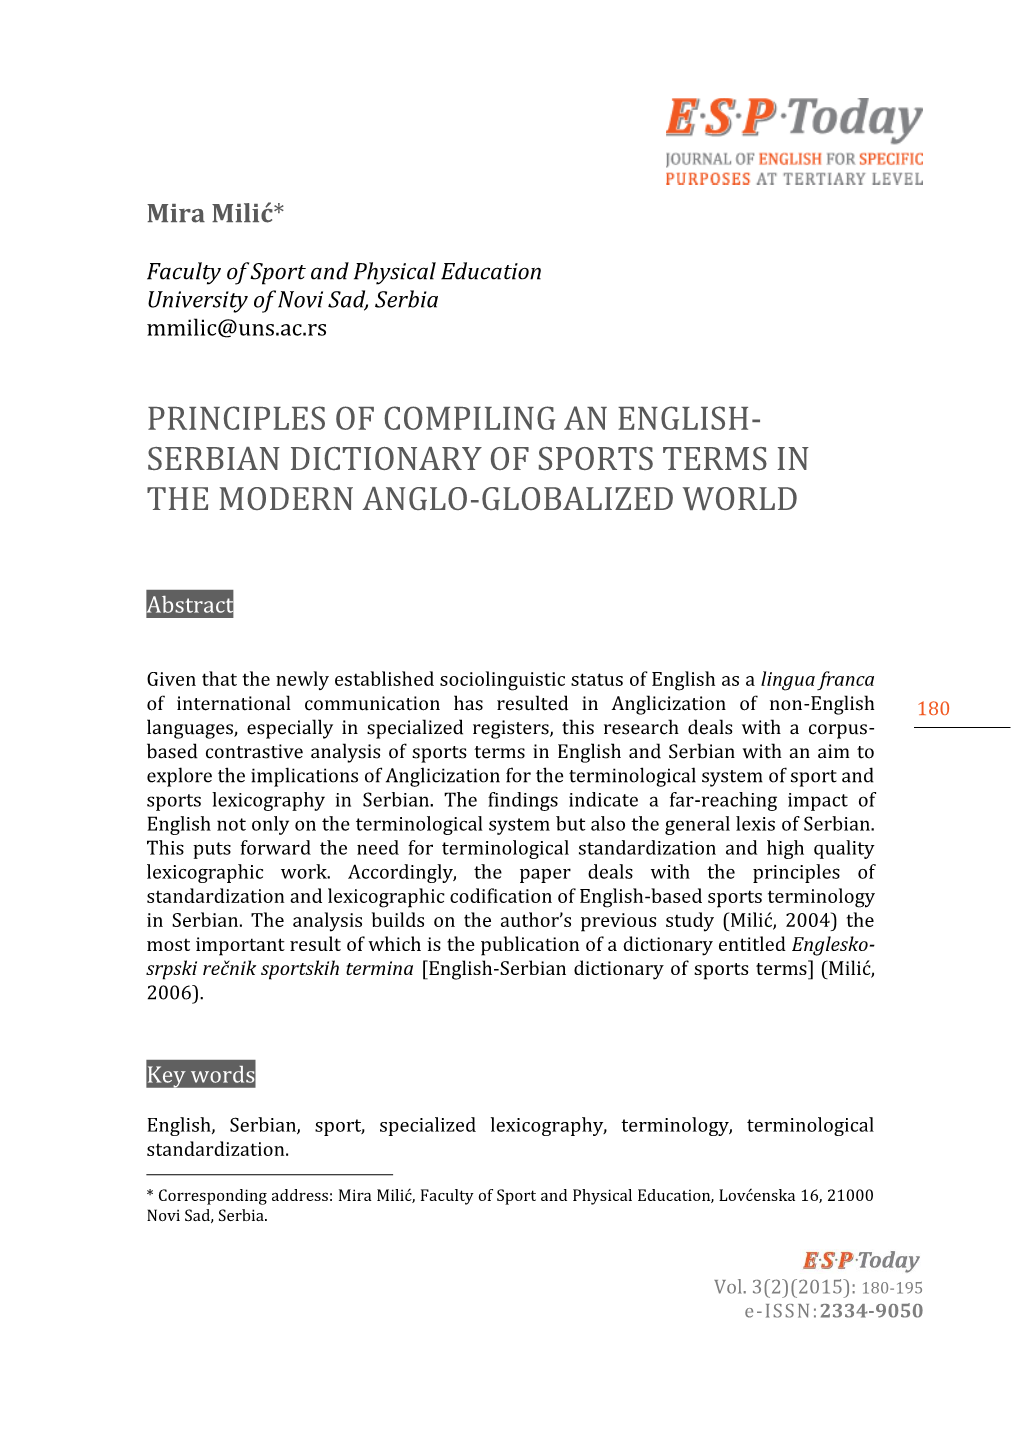 Principles of Compiling an English- Serbian Dictionary of Sports Terms in the Modern Anglo-Globalized World